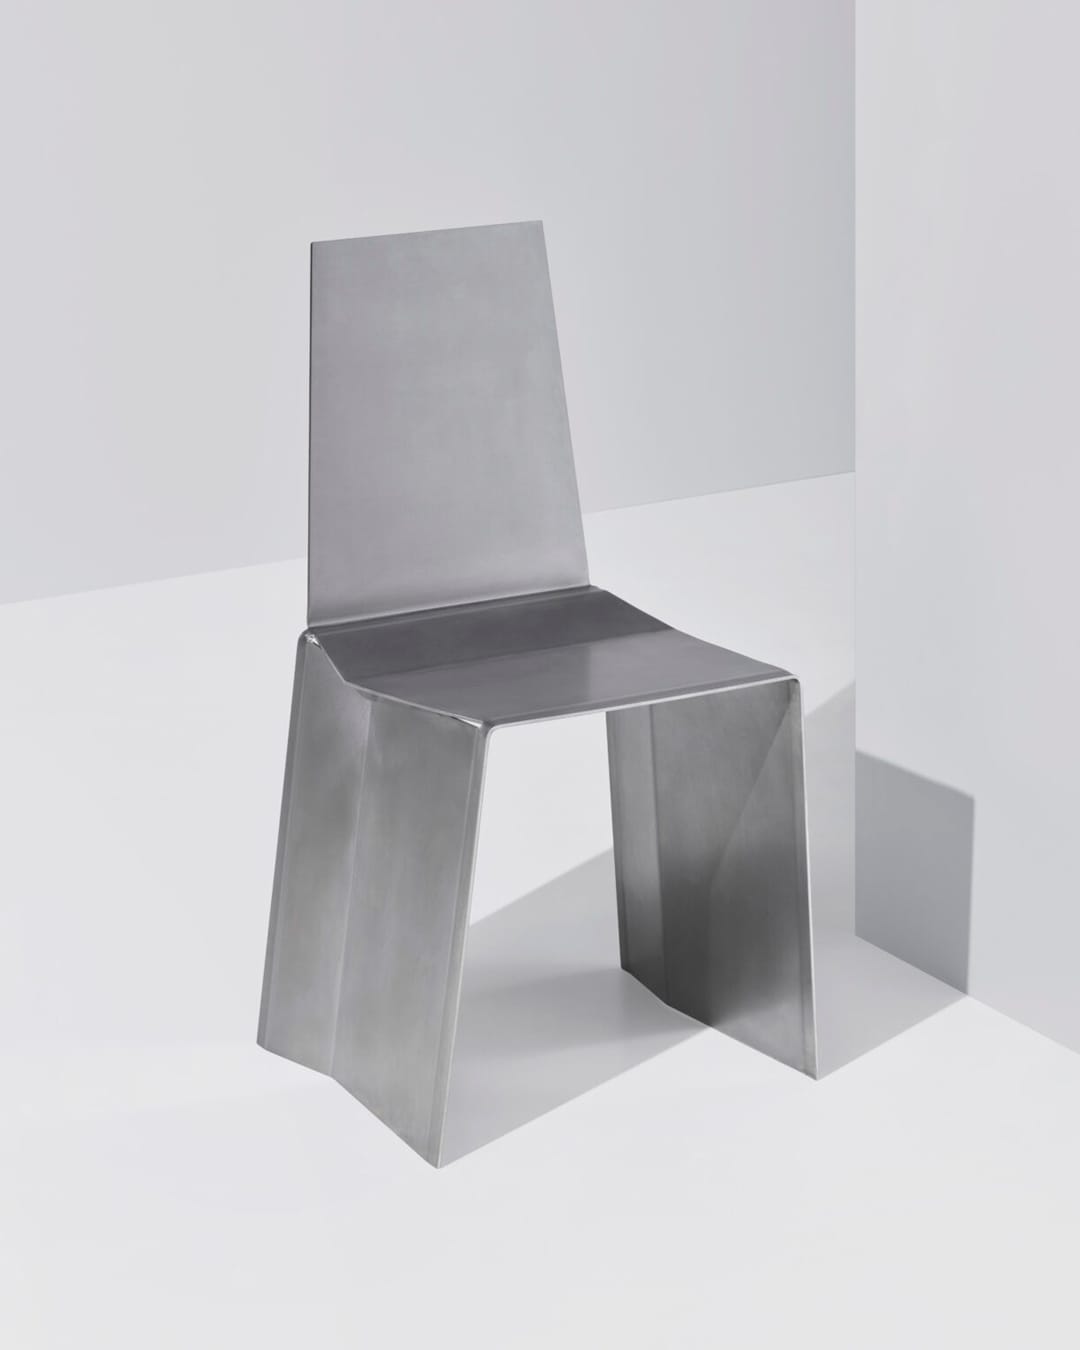 Paul Coenen folds single sheet of steel to form furniture pieces